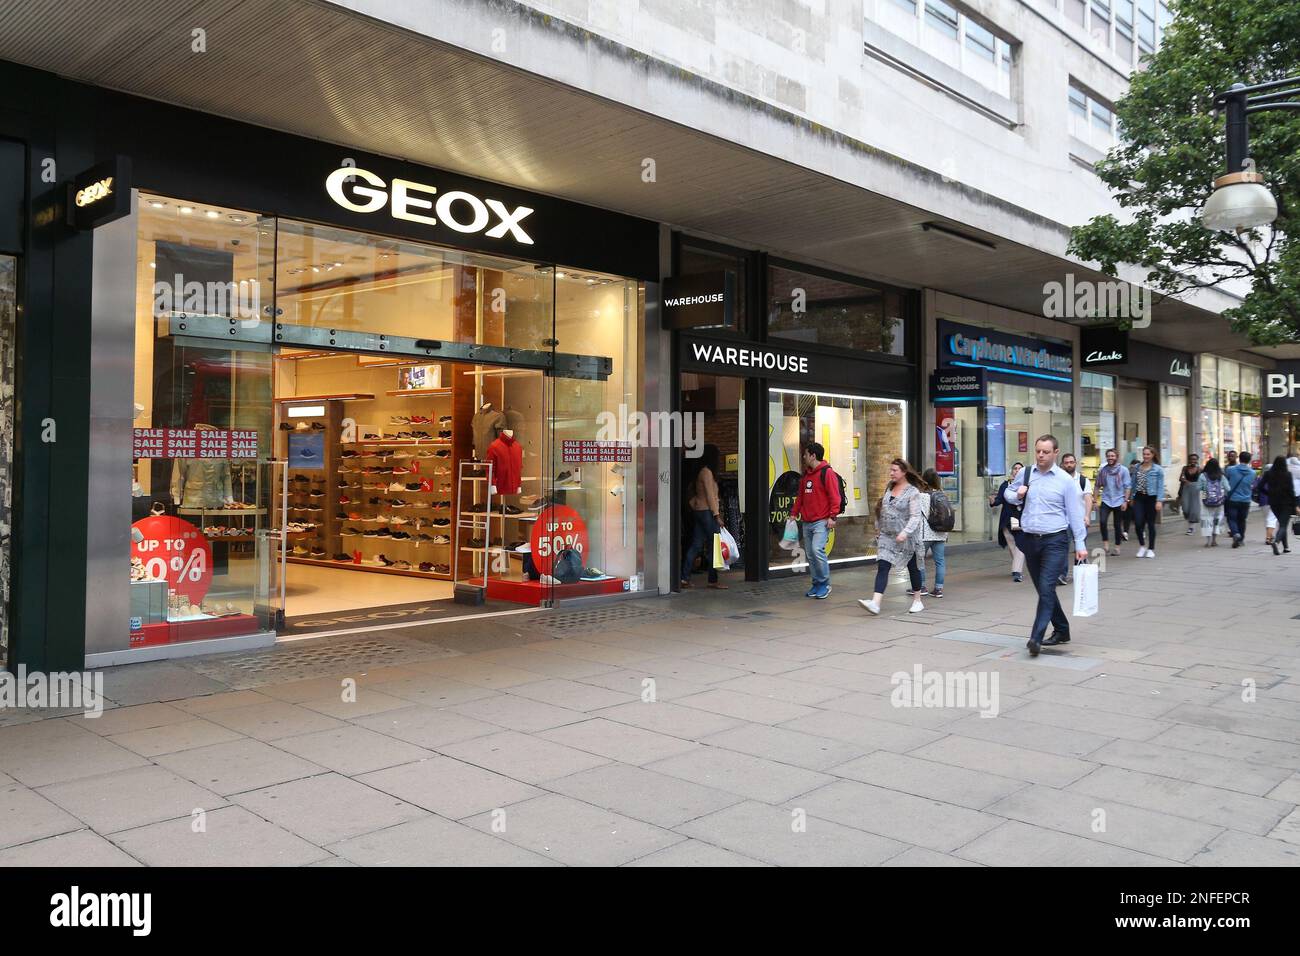 LONDON, UK - JULY 6, 2016: People shop at Geox footwear store Oxford Street  in London. Oxford Street has approximately half a million daily visitors a  Stock Photo - Alamy